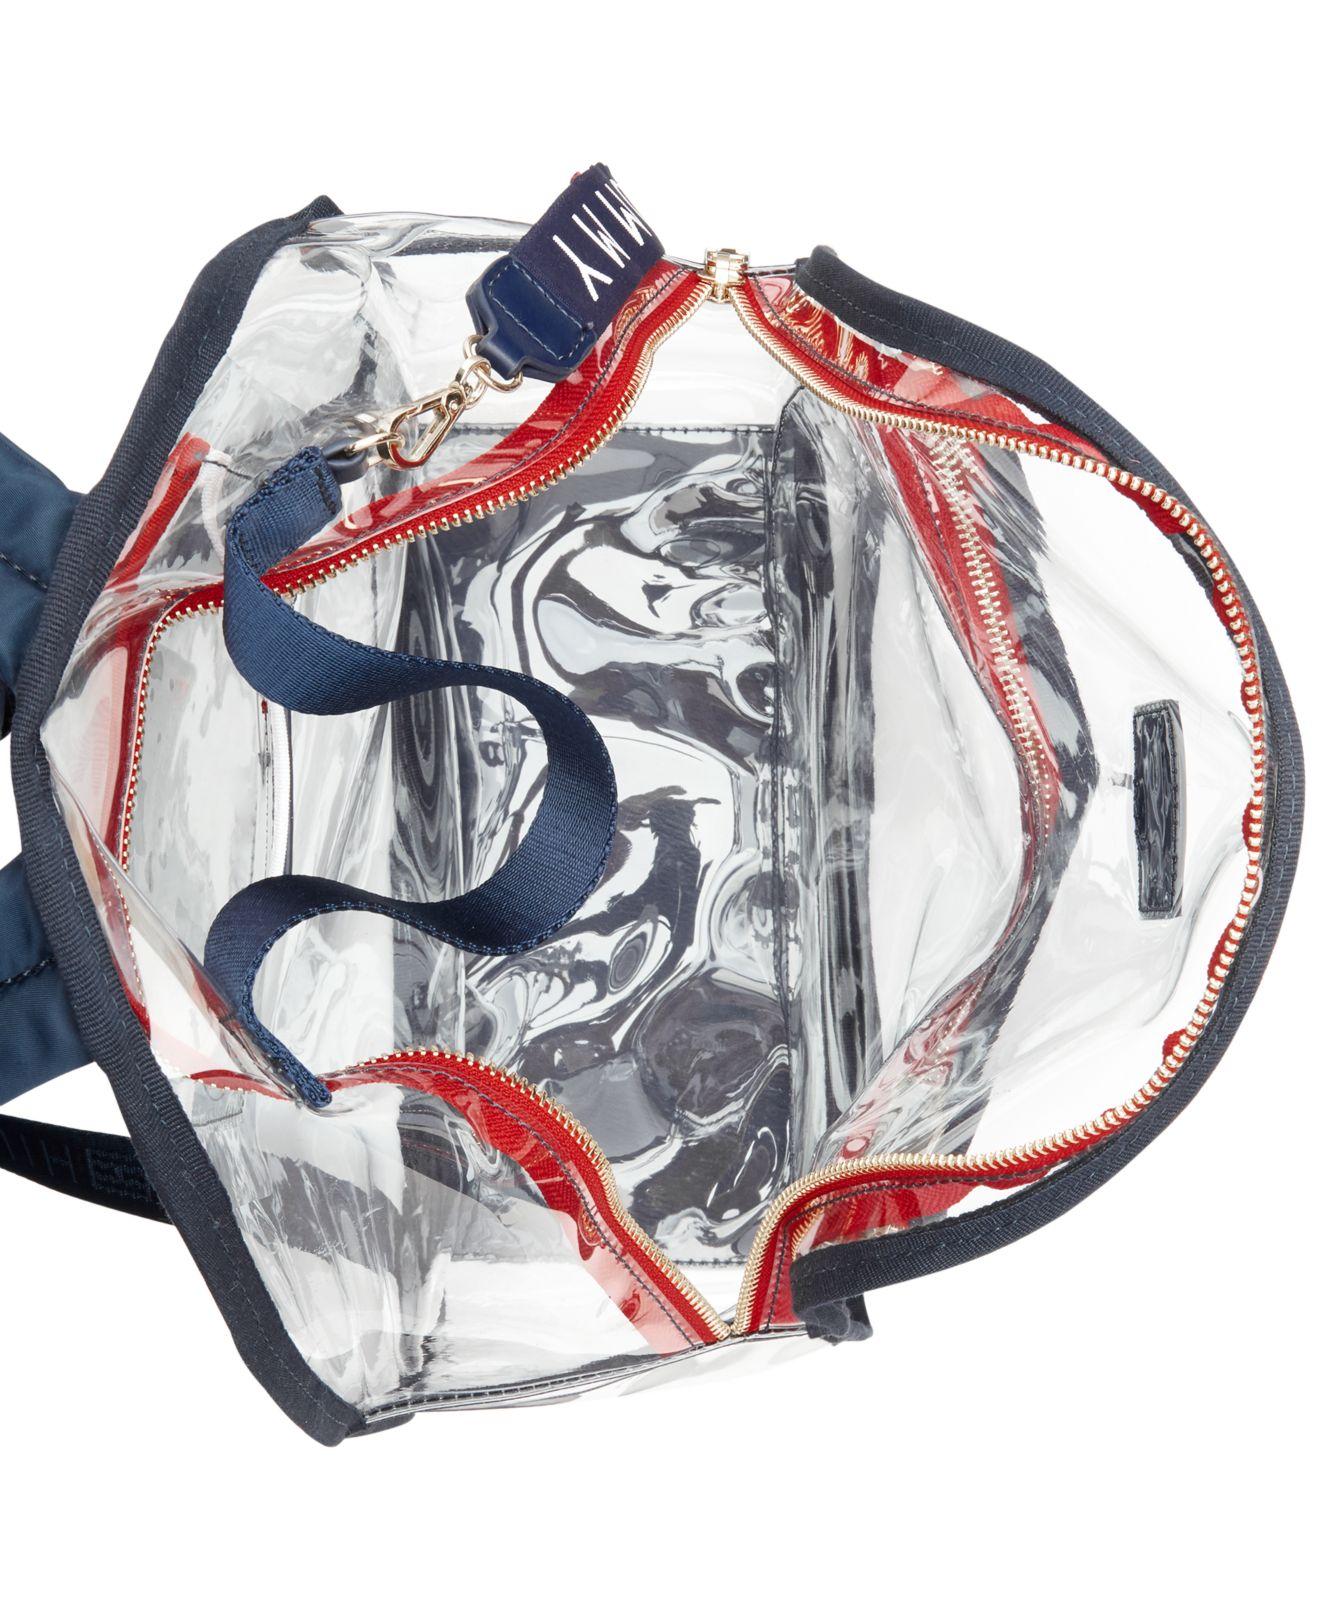 tommy hilfiger clear backpack